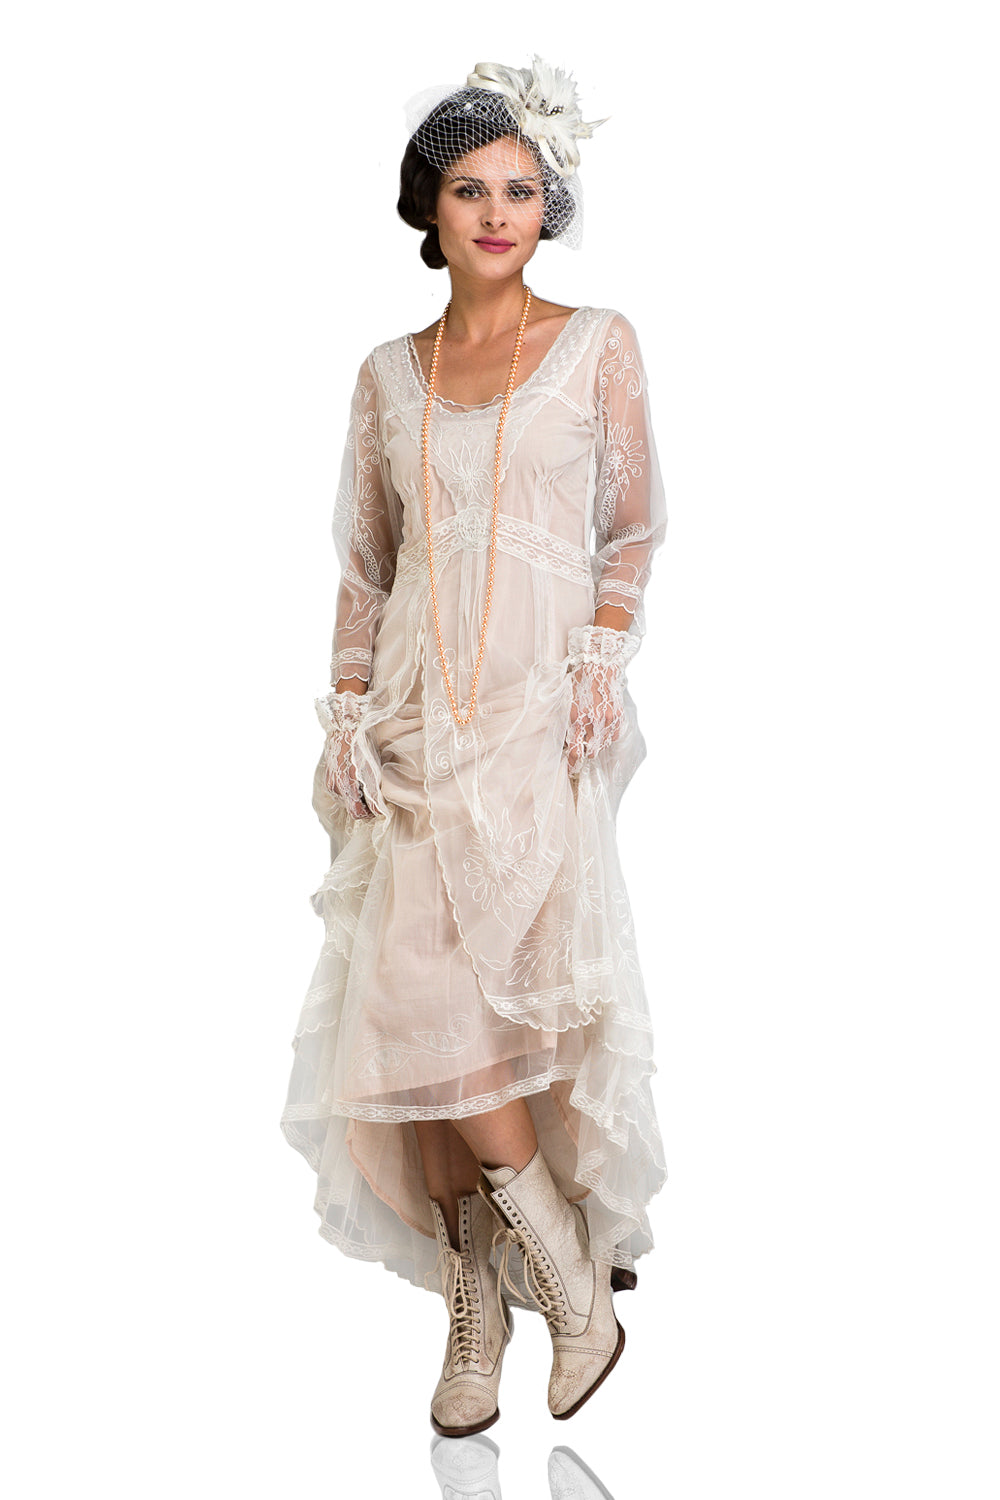 Nataya 40163 Downton Abbey Tea Party Gown in Ivory/Peach